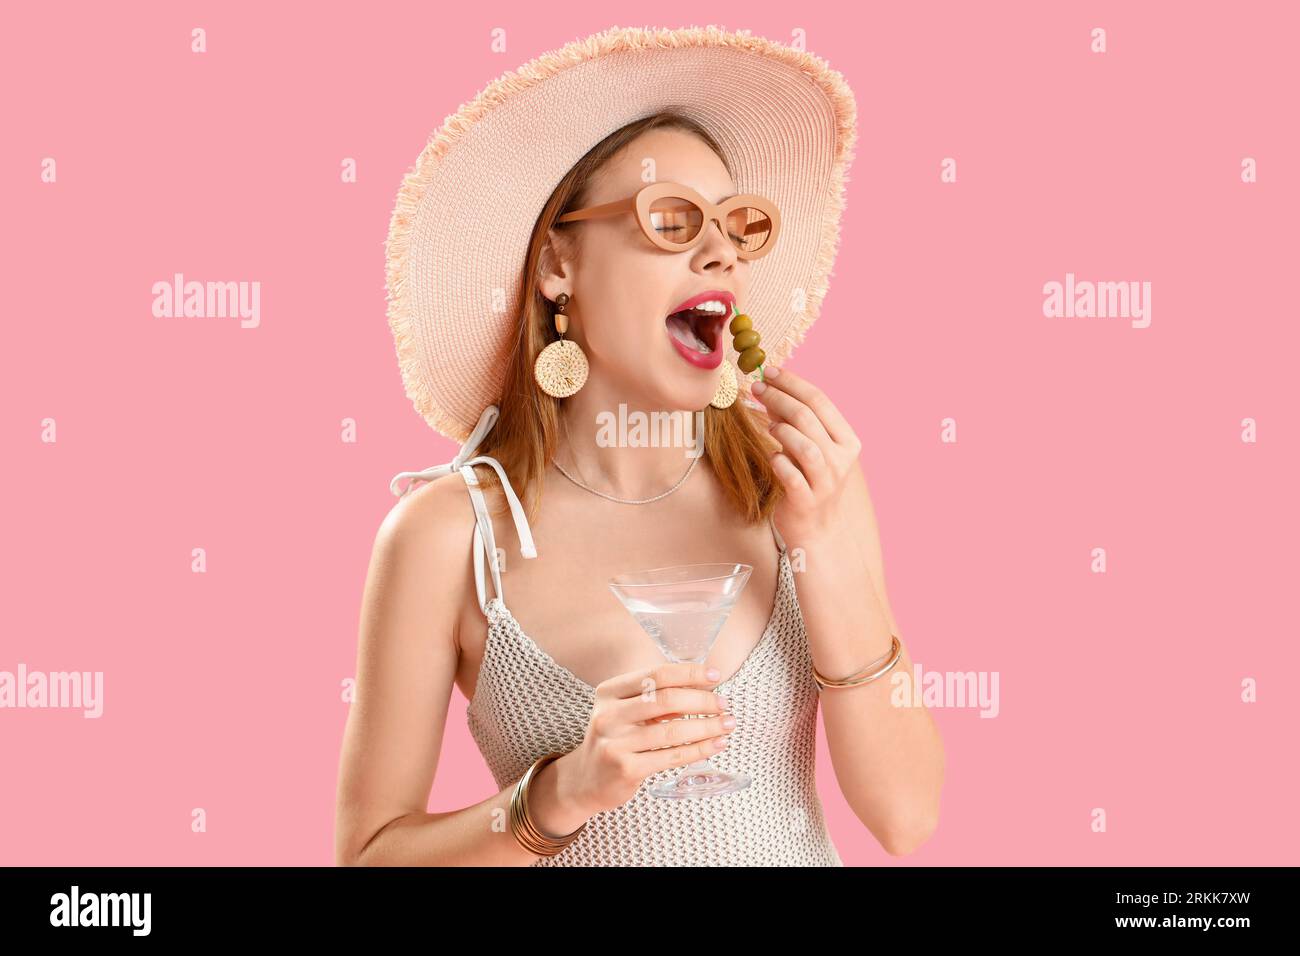 Beautiful young woman in wicker hat with glass of martini eating olives on pink background Stock Photo